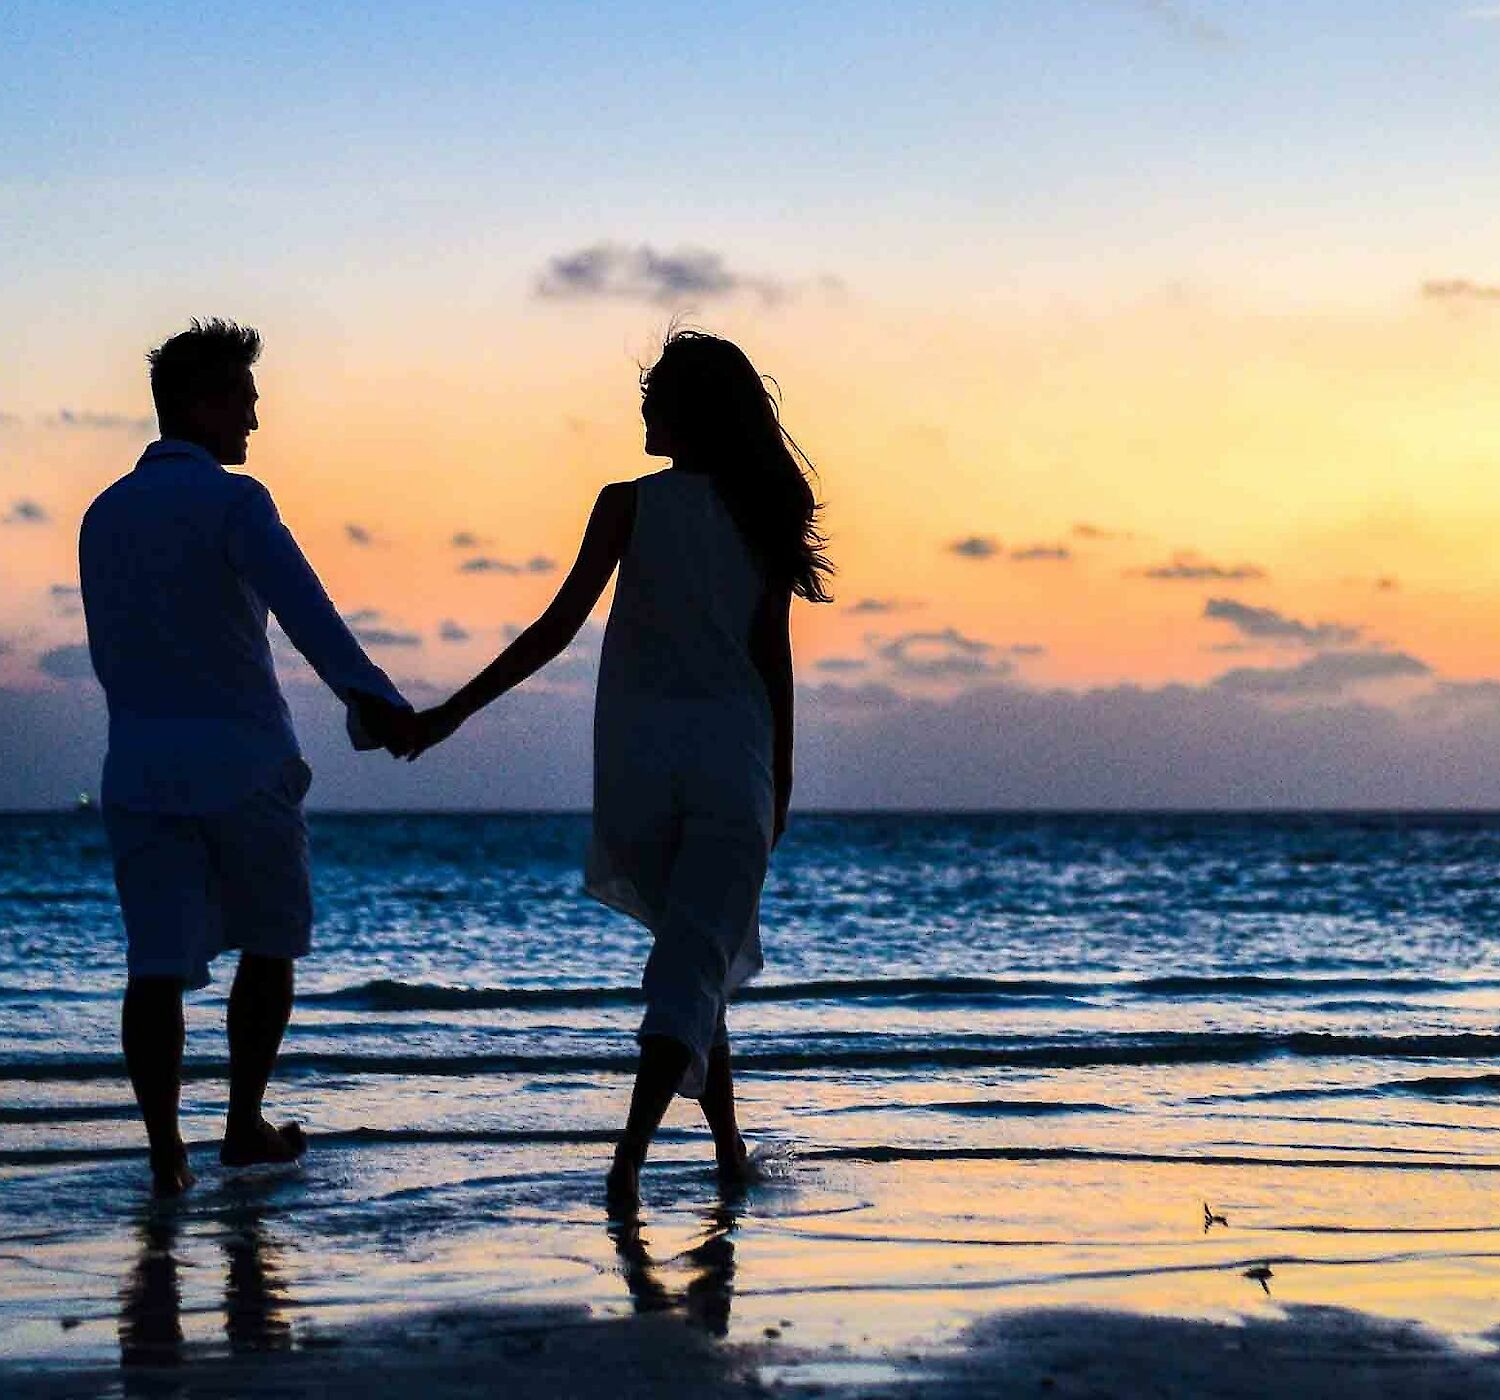 A couple holding hands walks along a beach at sunset, with calm waves and a colorful sky in the background.